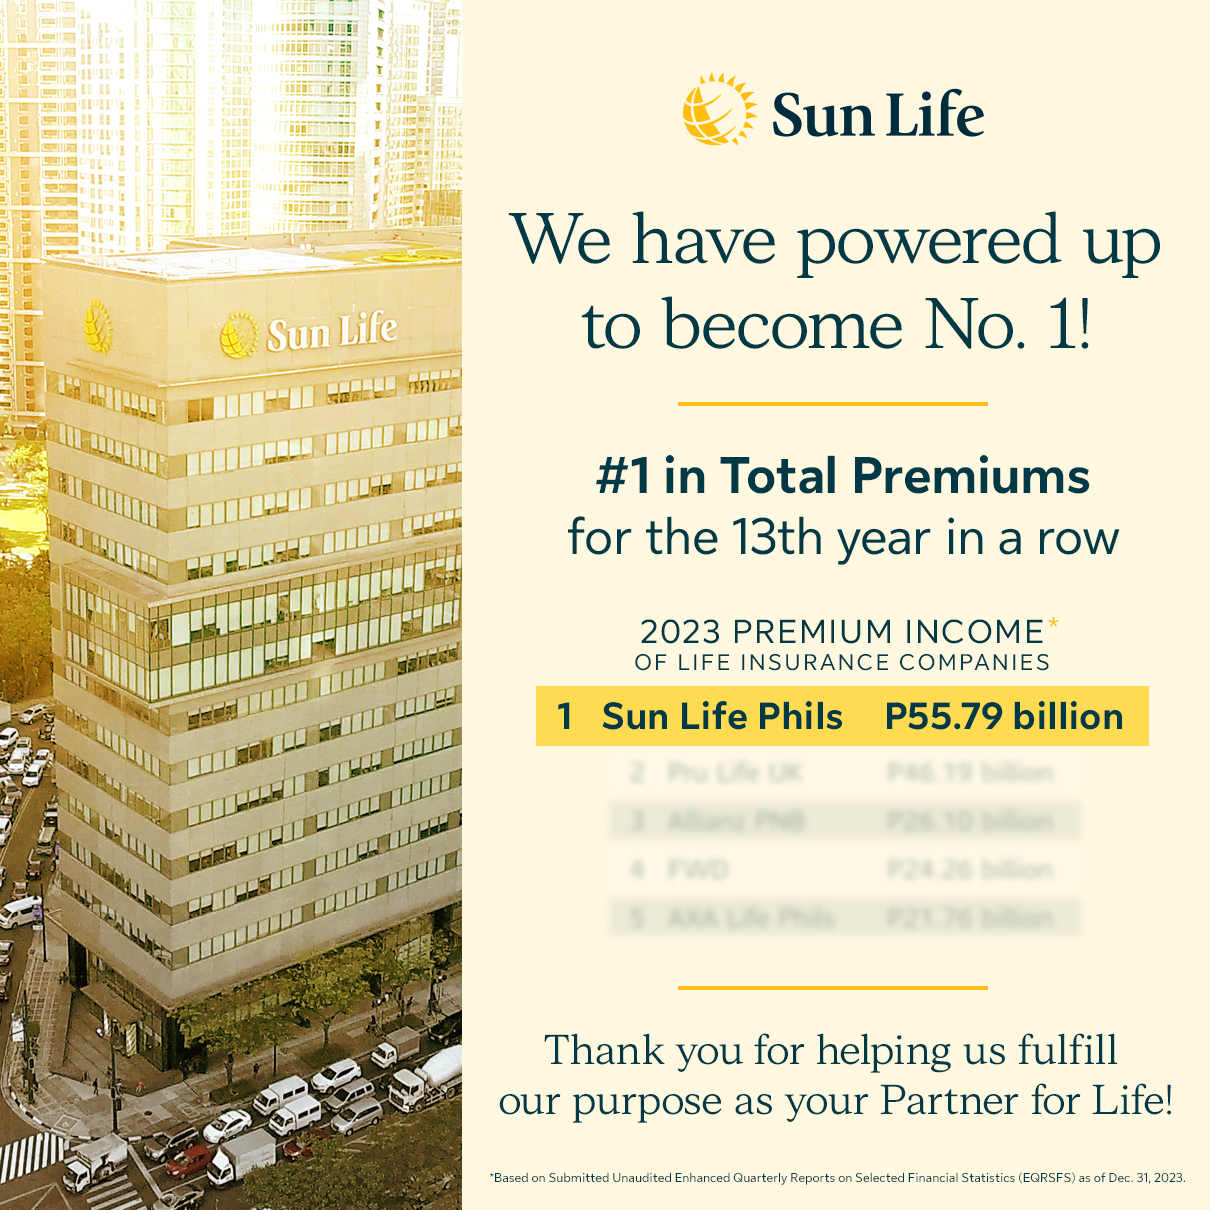 Sun Life reigns as the no. 1 life insurance company for the 13th year in a row